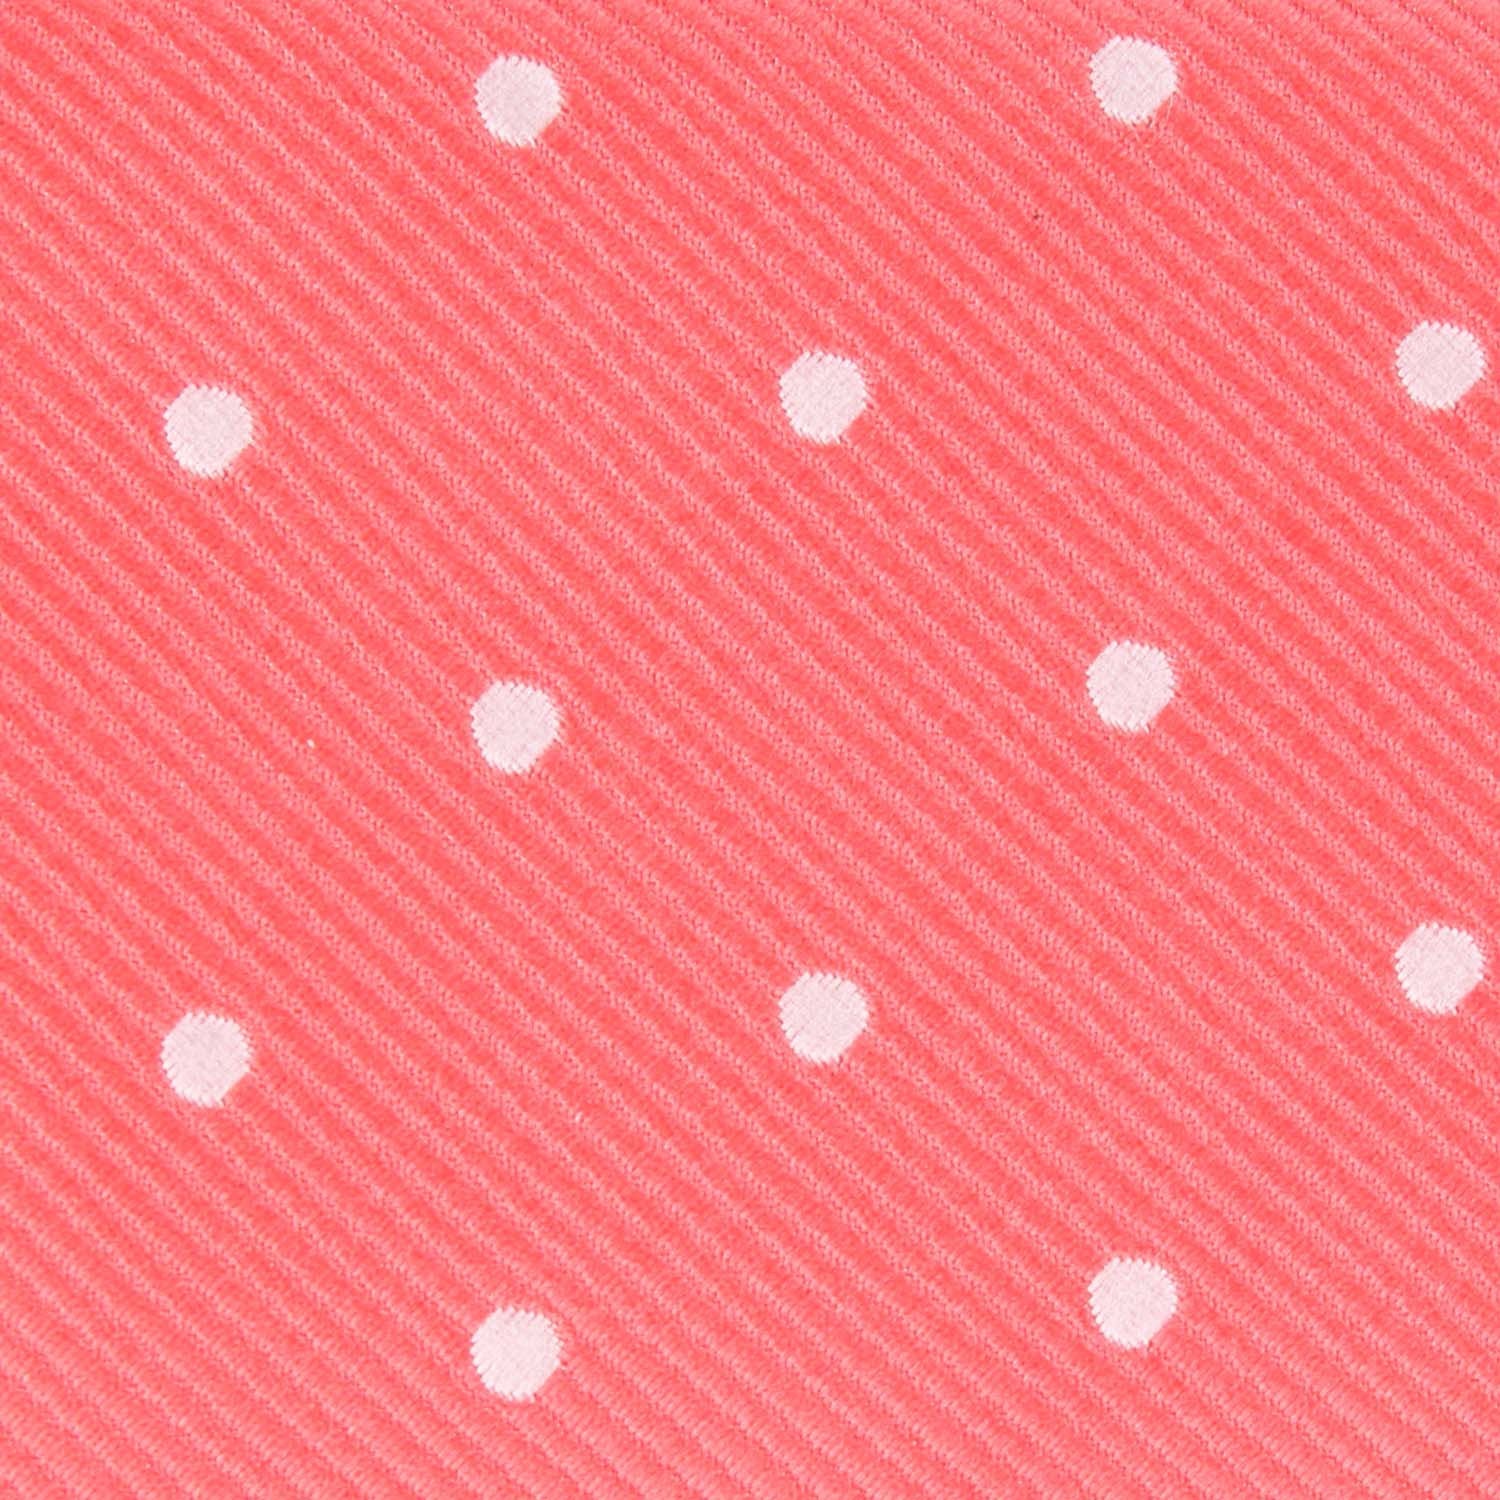 Coral Pink with White Polka Dots Fabric Necktie M139